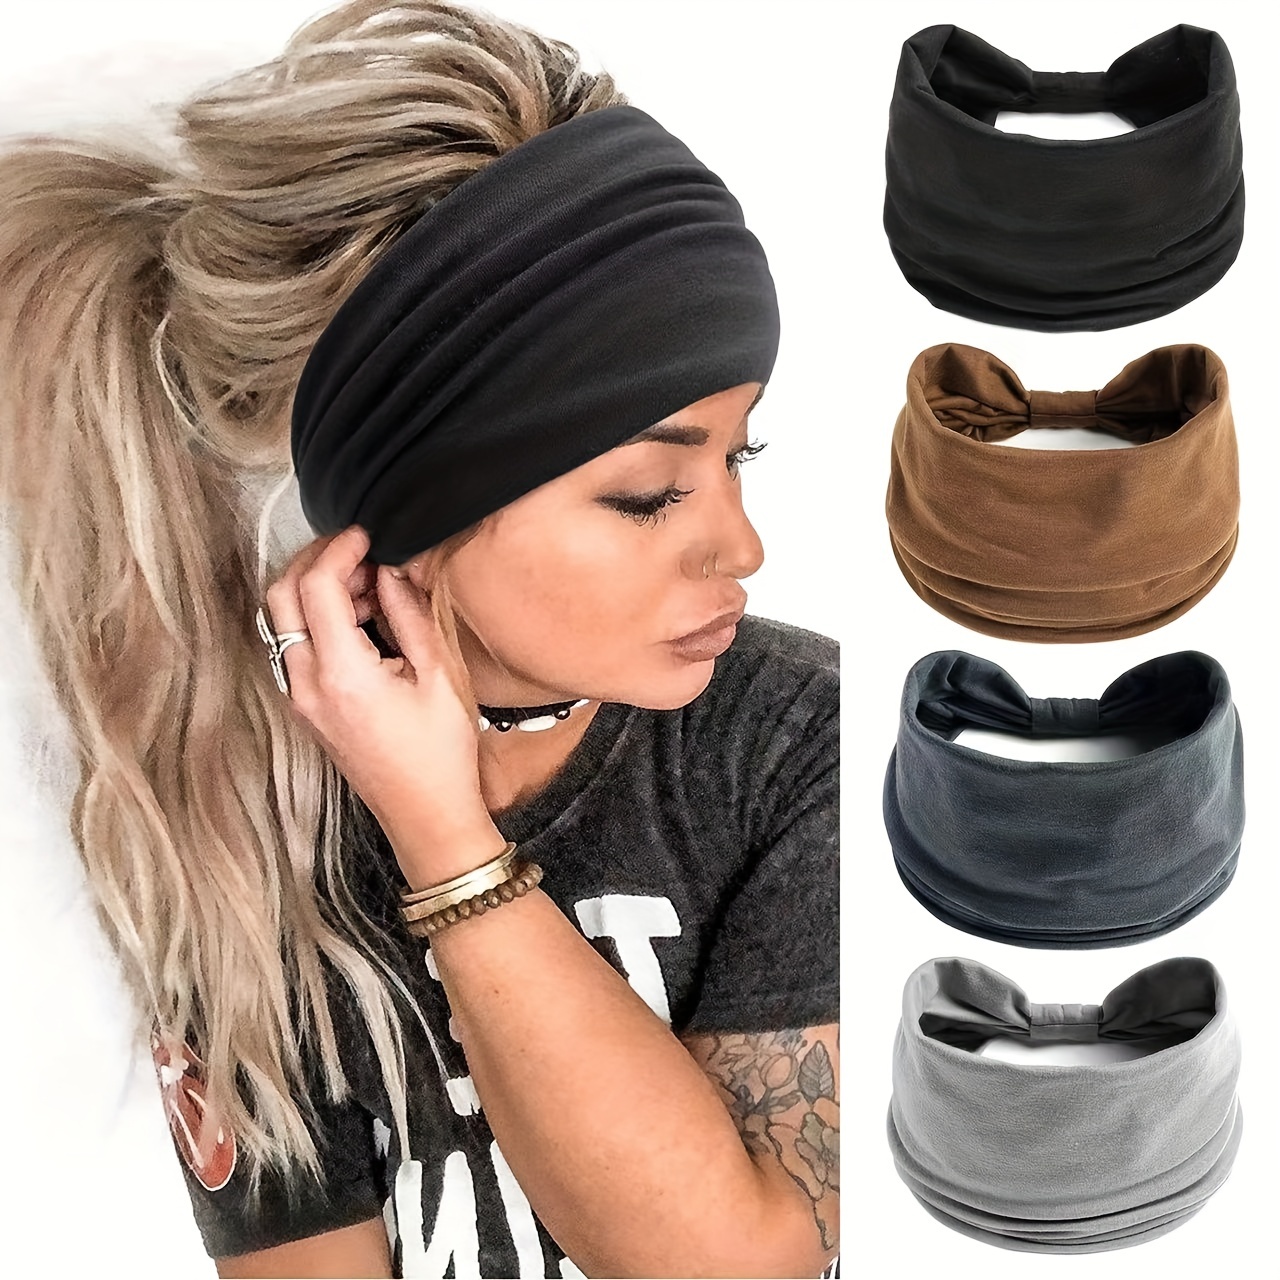 

Stylish Boho Headbands For Women - Perfect For Yoga, Fitness, And Running - Thick Hairbands For Maximum Comfort And Style - Hair Accessories For Women